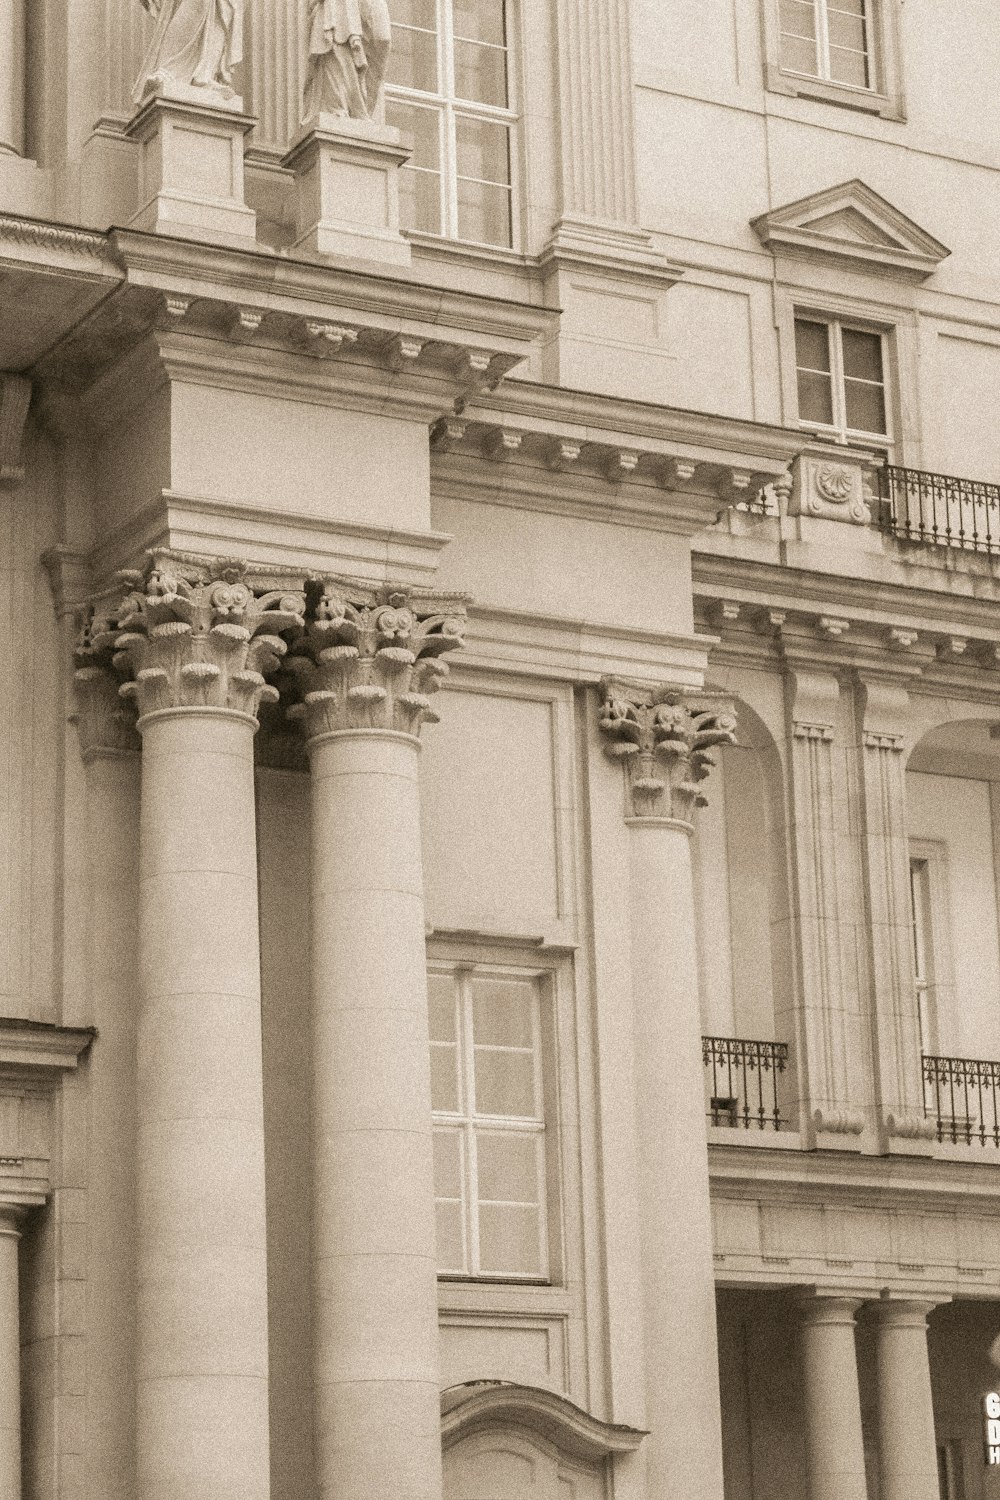 a building with columns and statues